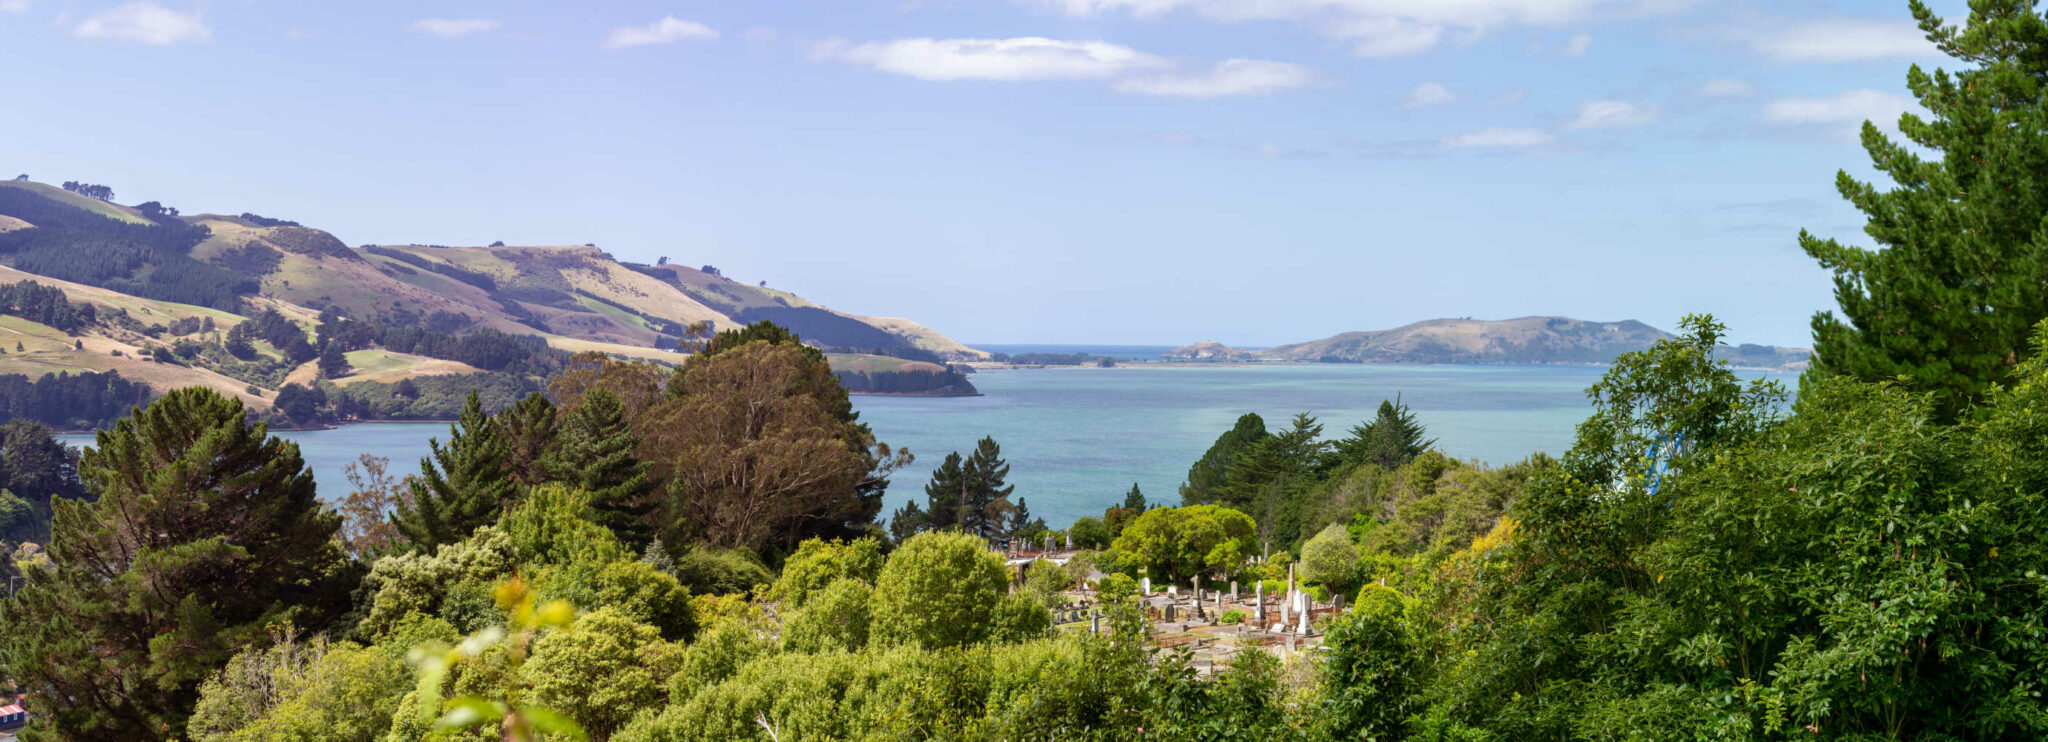 Panorama of Otago Harbour from hillside over cemetery in Port Chalmers, New Zealand